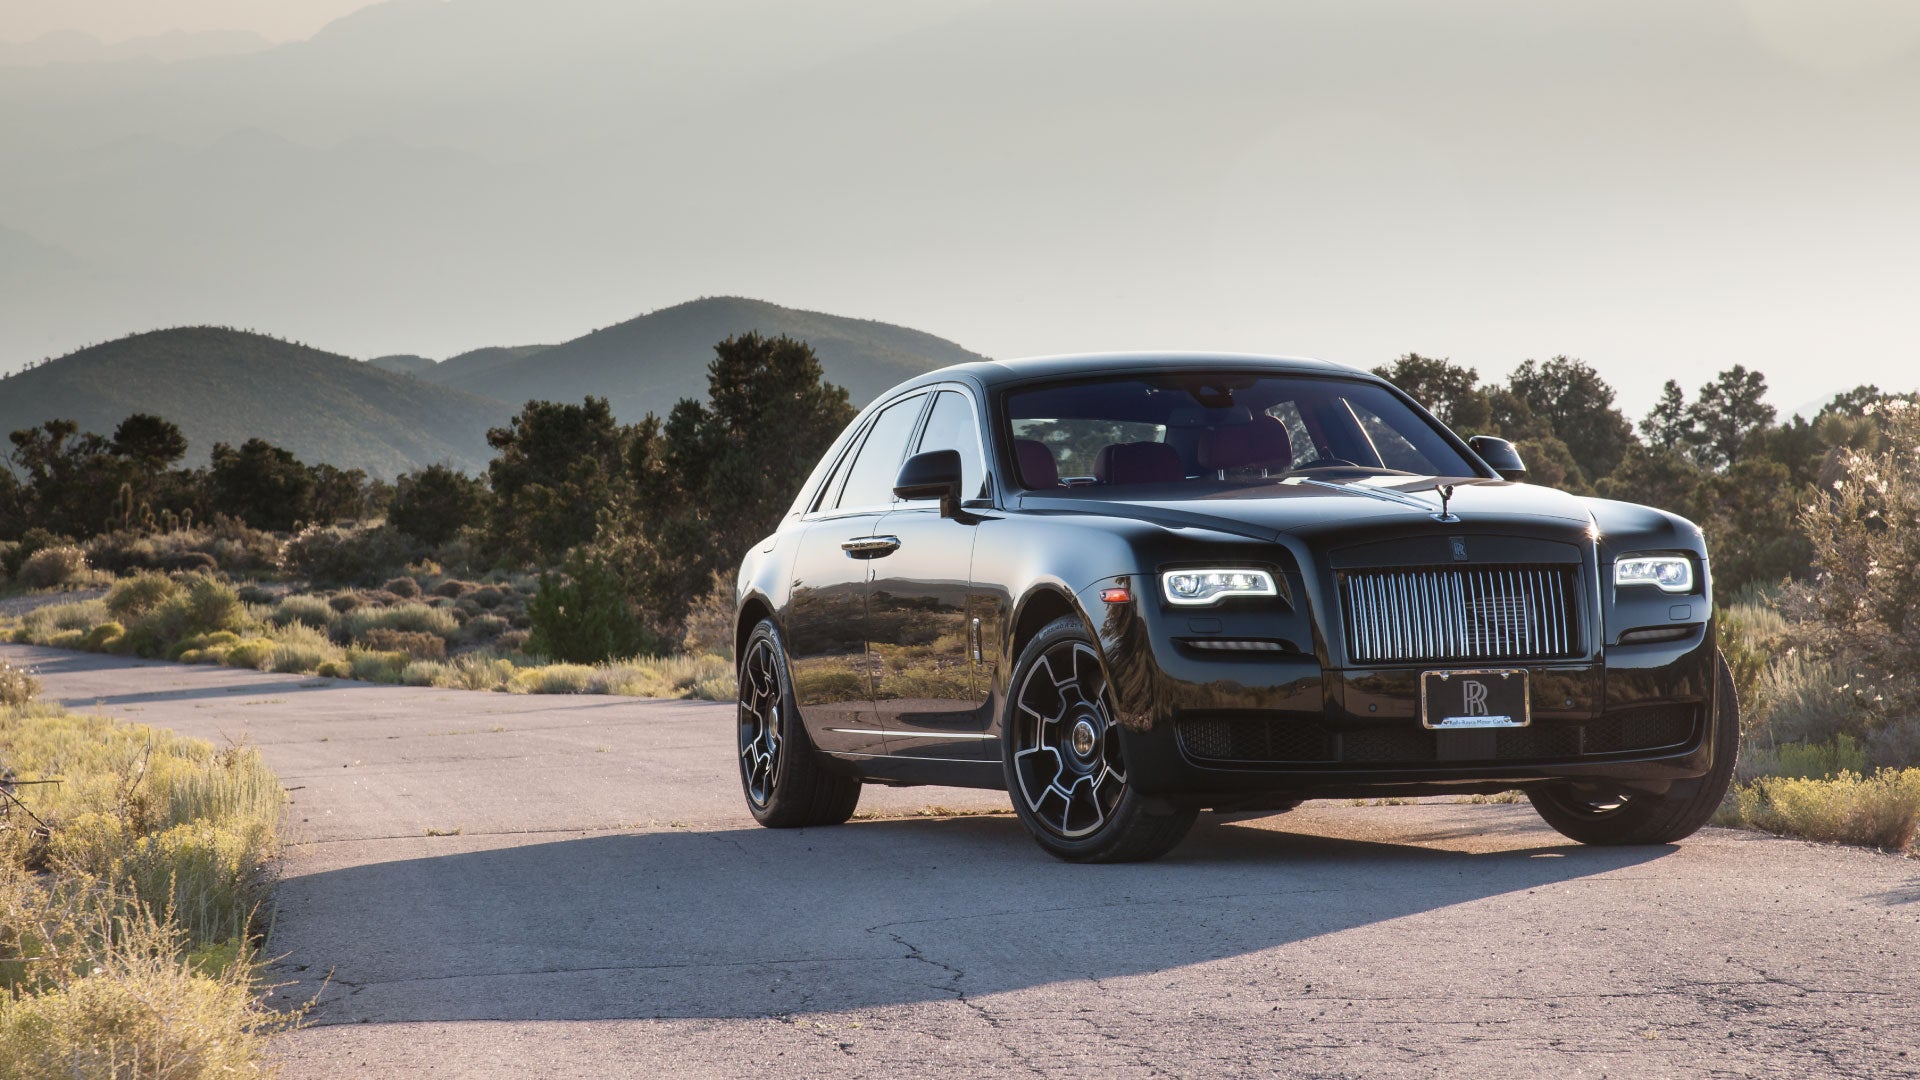 5 Facts About RollsRoyce That Boggled Our Simple Peasant Minds   AutoGuidecom